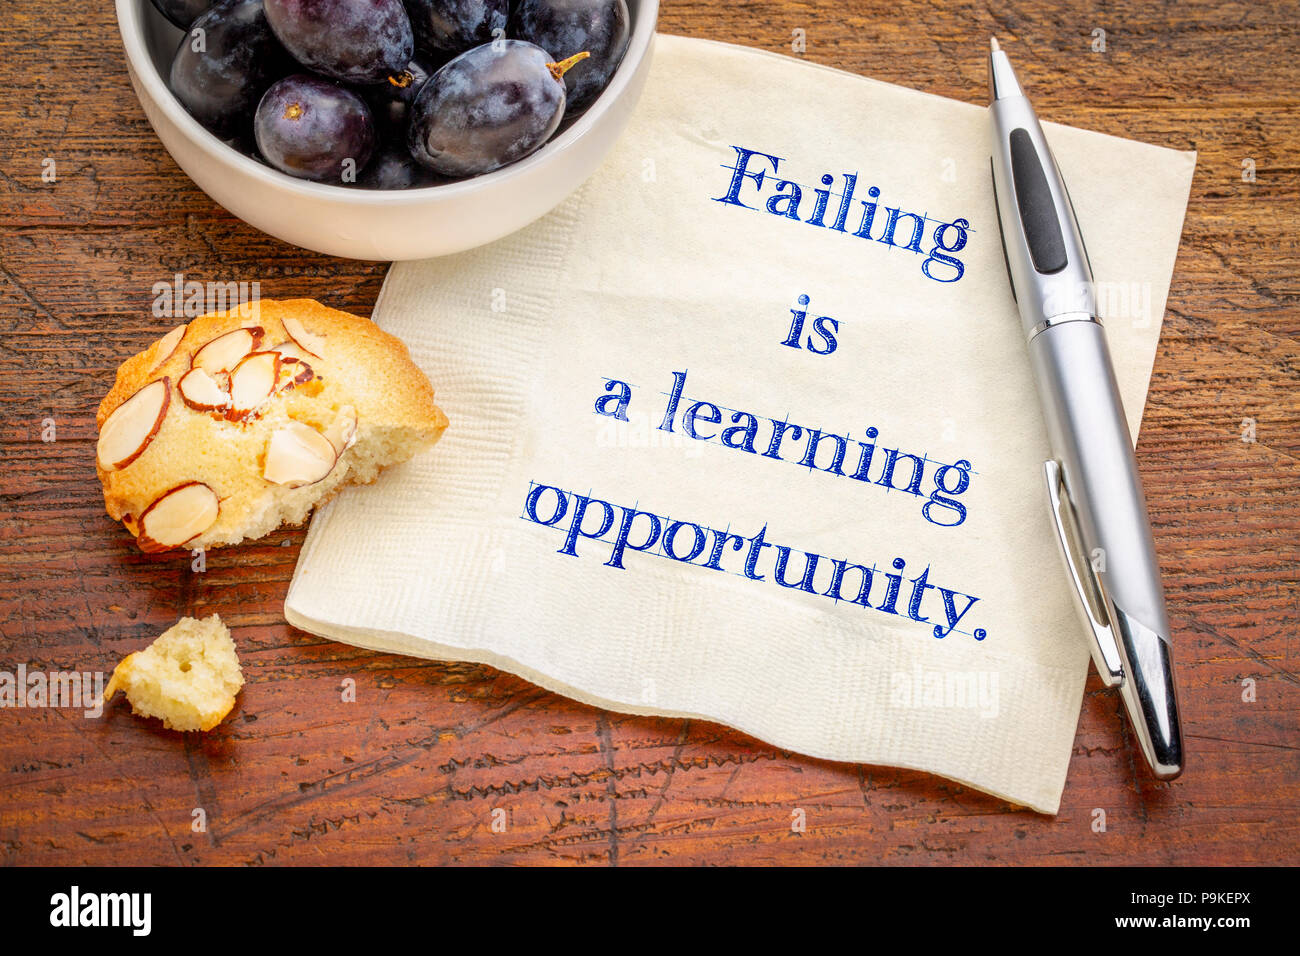 Failing is a learning opportunity - handwriting on a napkin with a cup of coffee Stock Photo